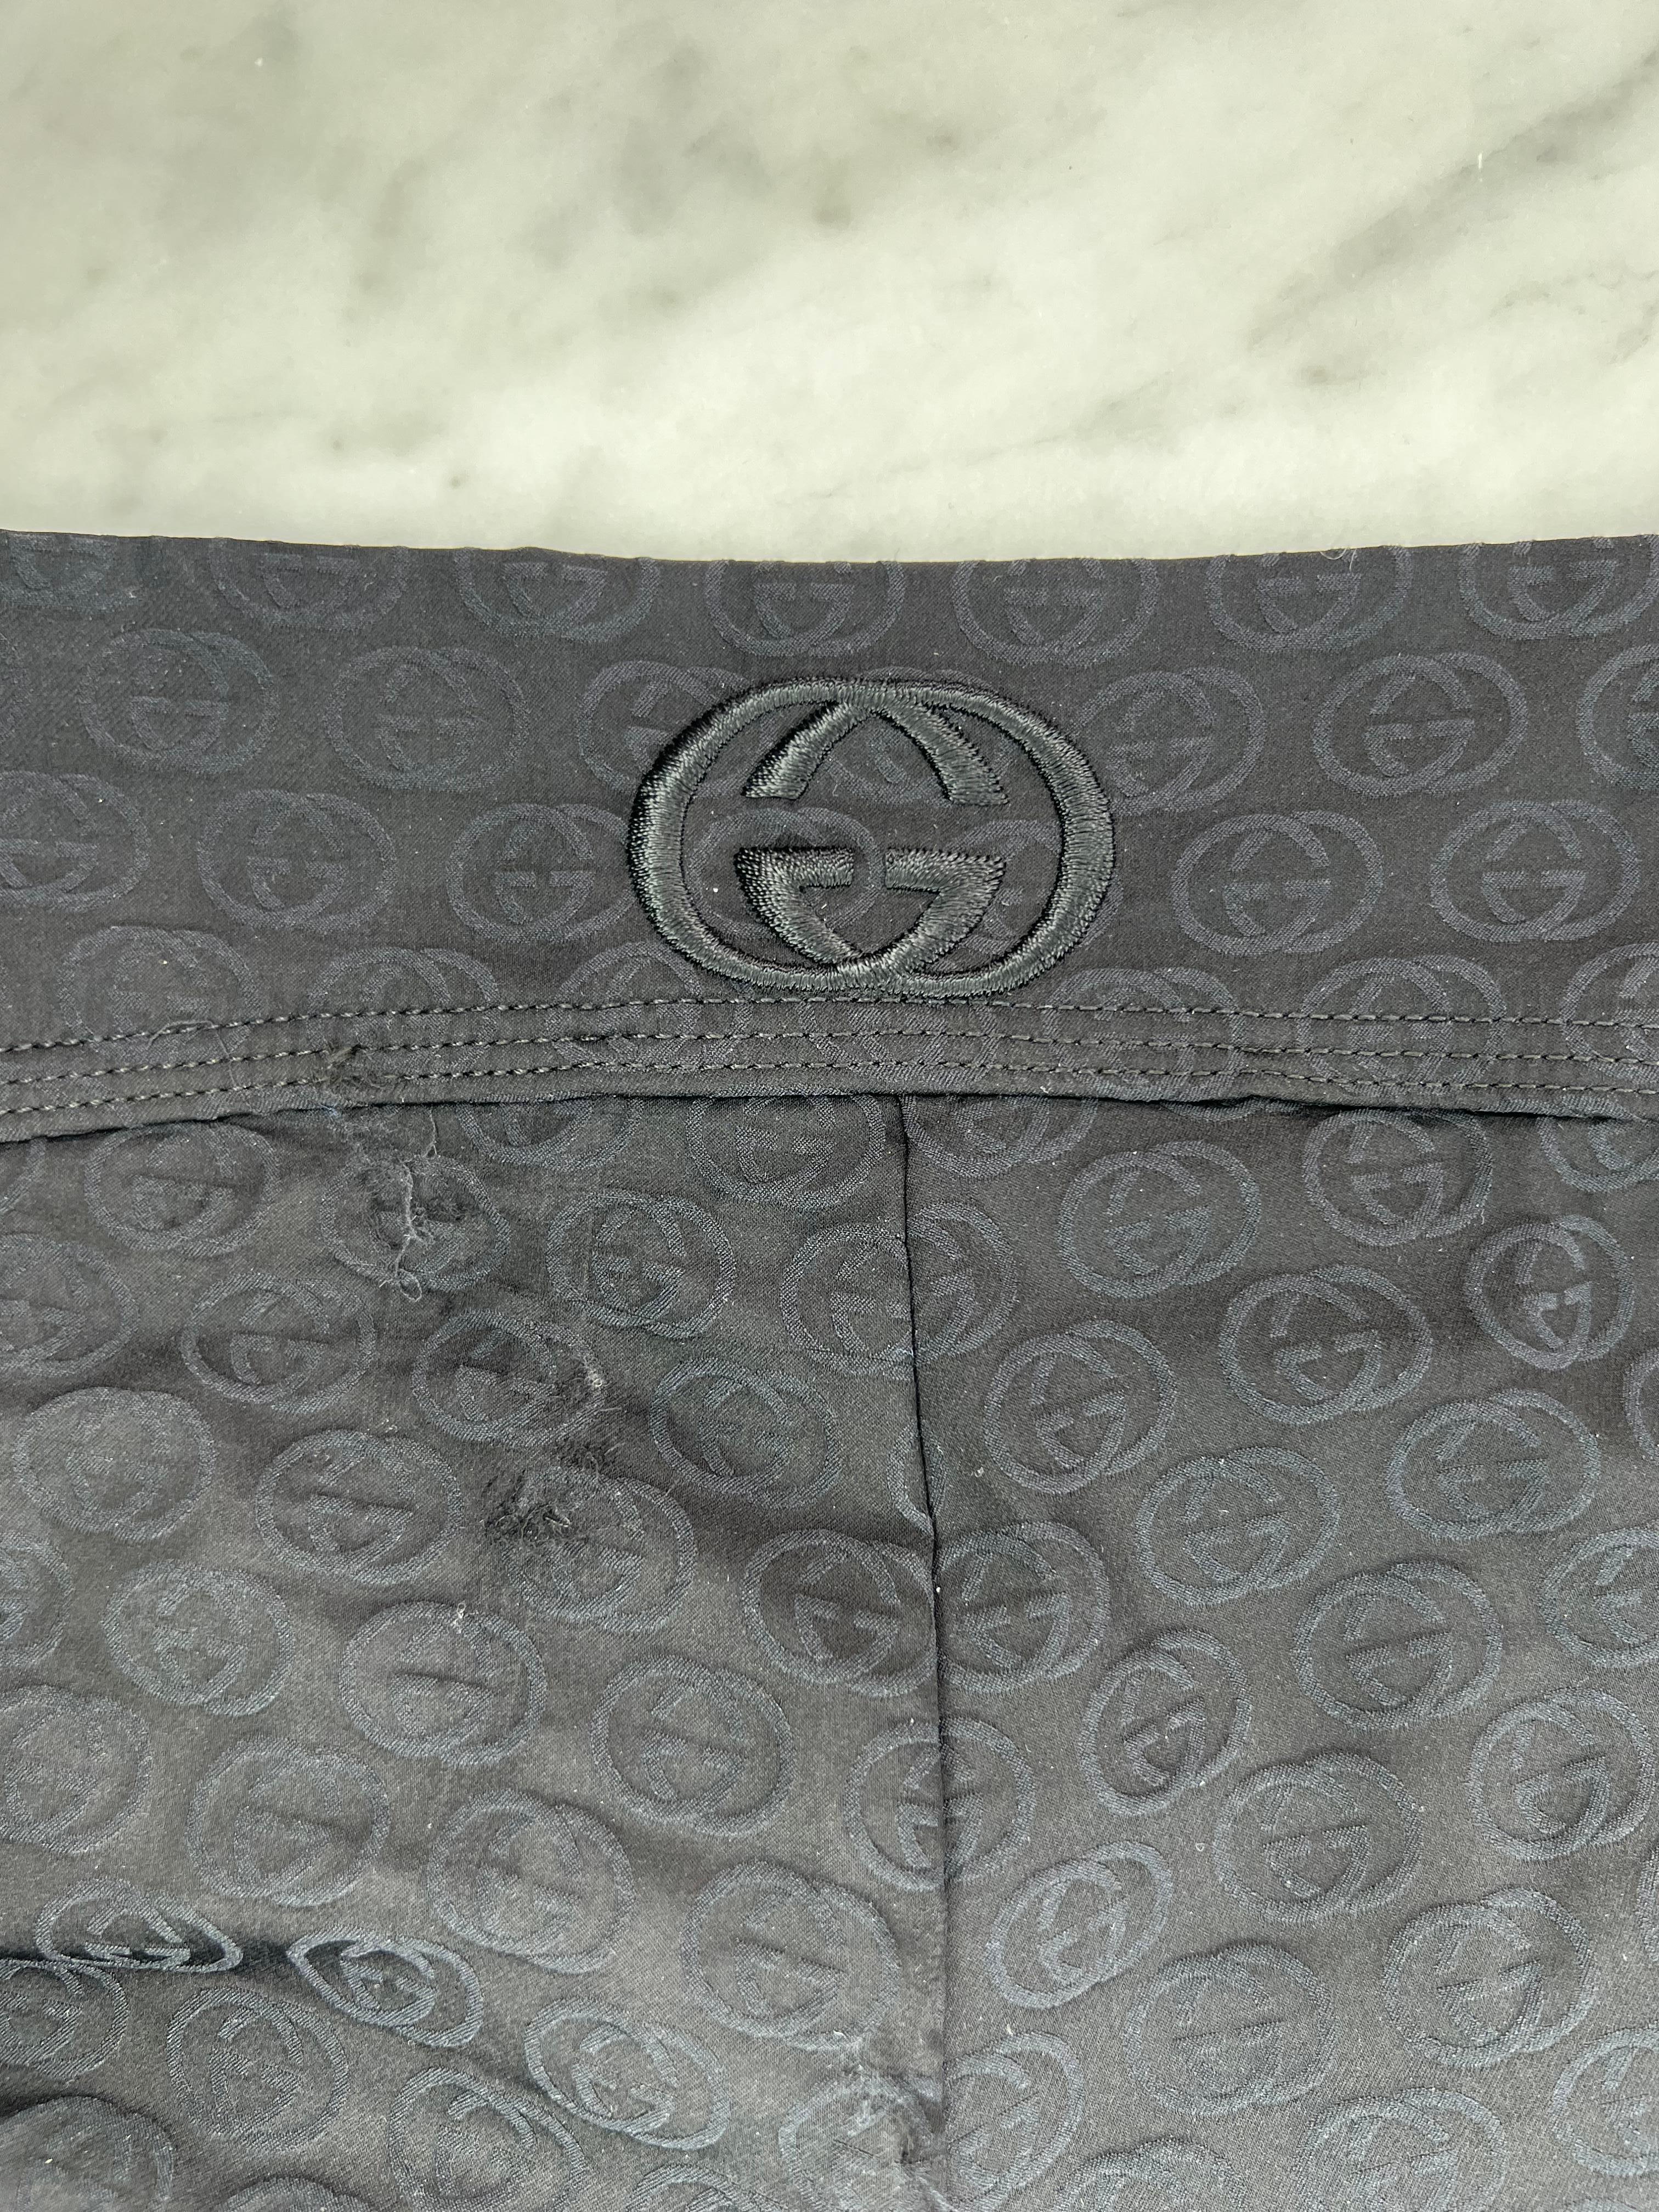 Women's S/S 2003 Gucci by Tom Ford GG Monogram Stretch Swim Black Hot Pants Shorts For Sale